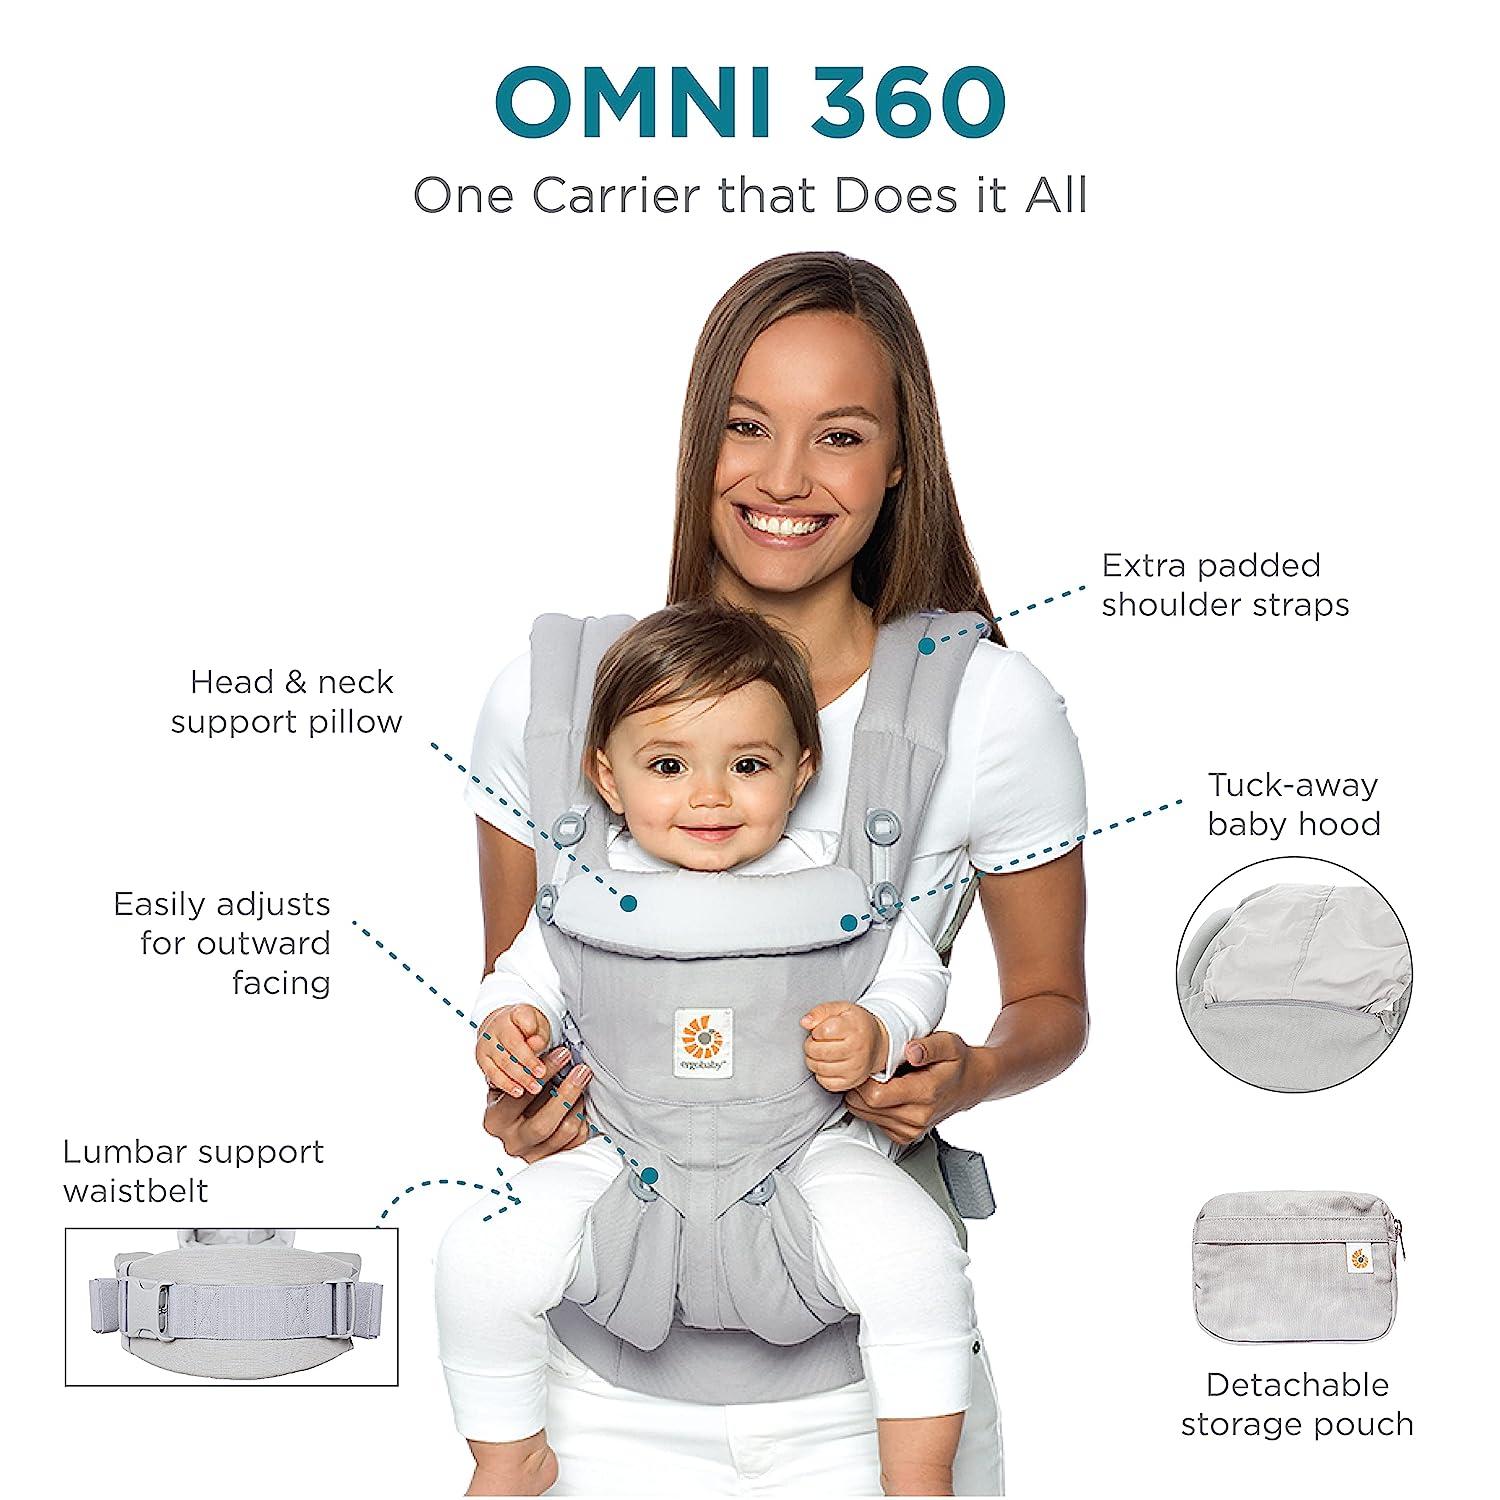 Ergobaby 360 All-Position Baby Carrier with Lumbar India